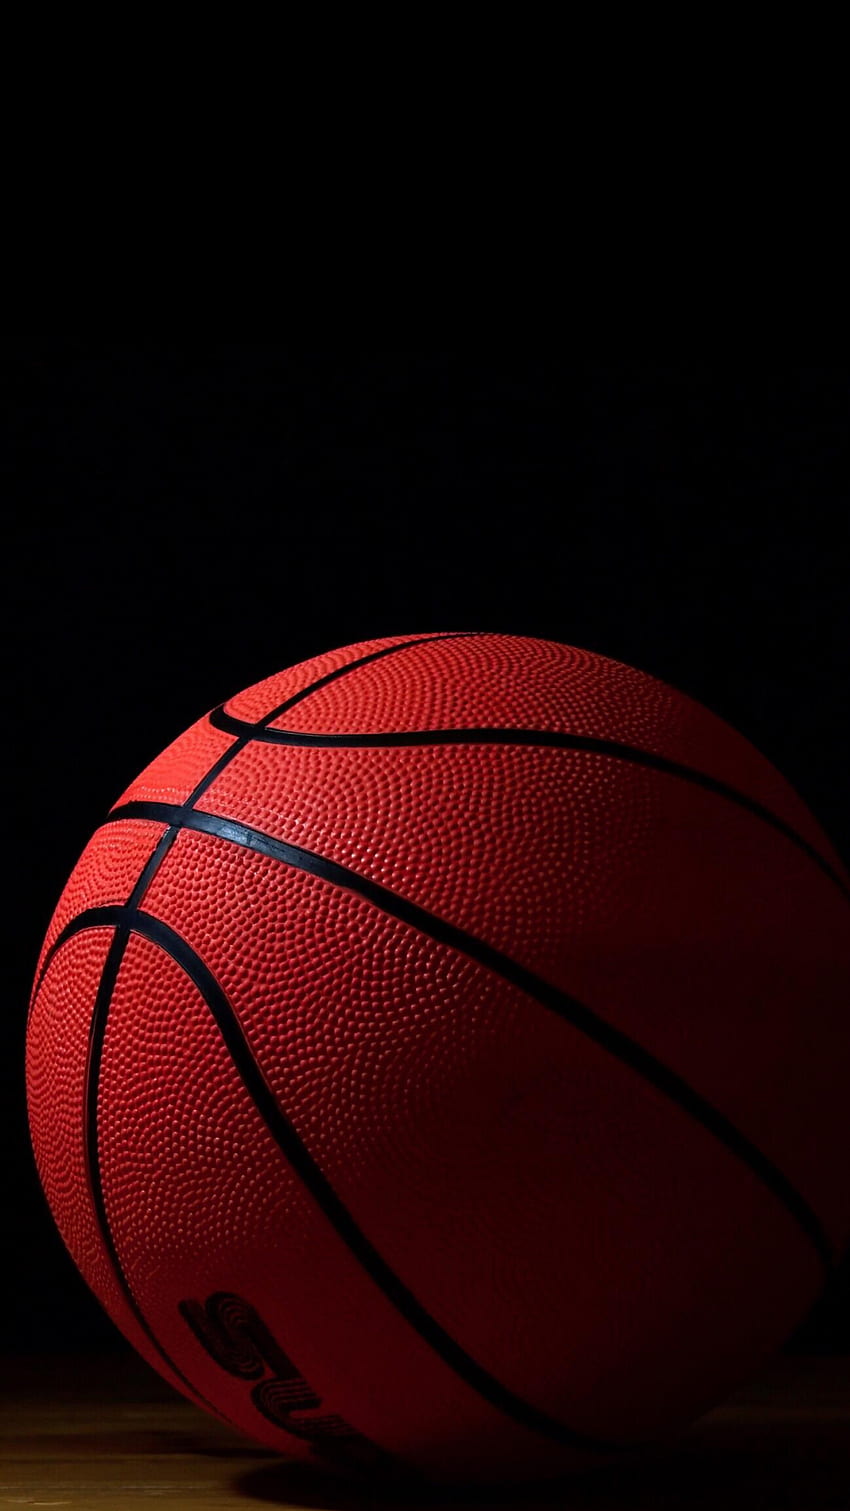 Basketball Phone Wallpaper  Mobile Abyss